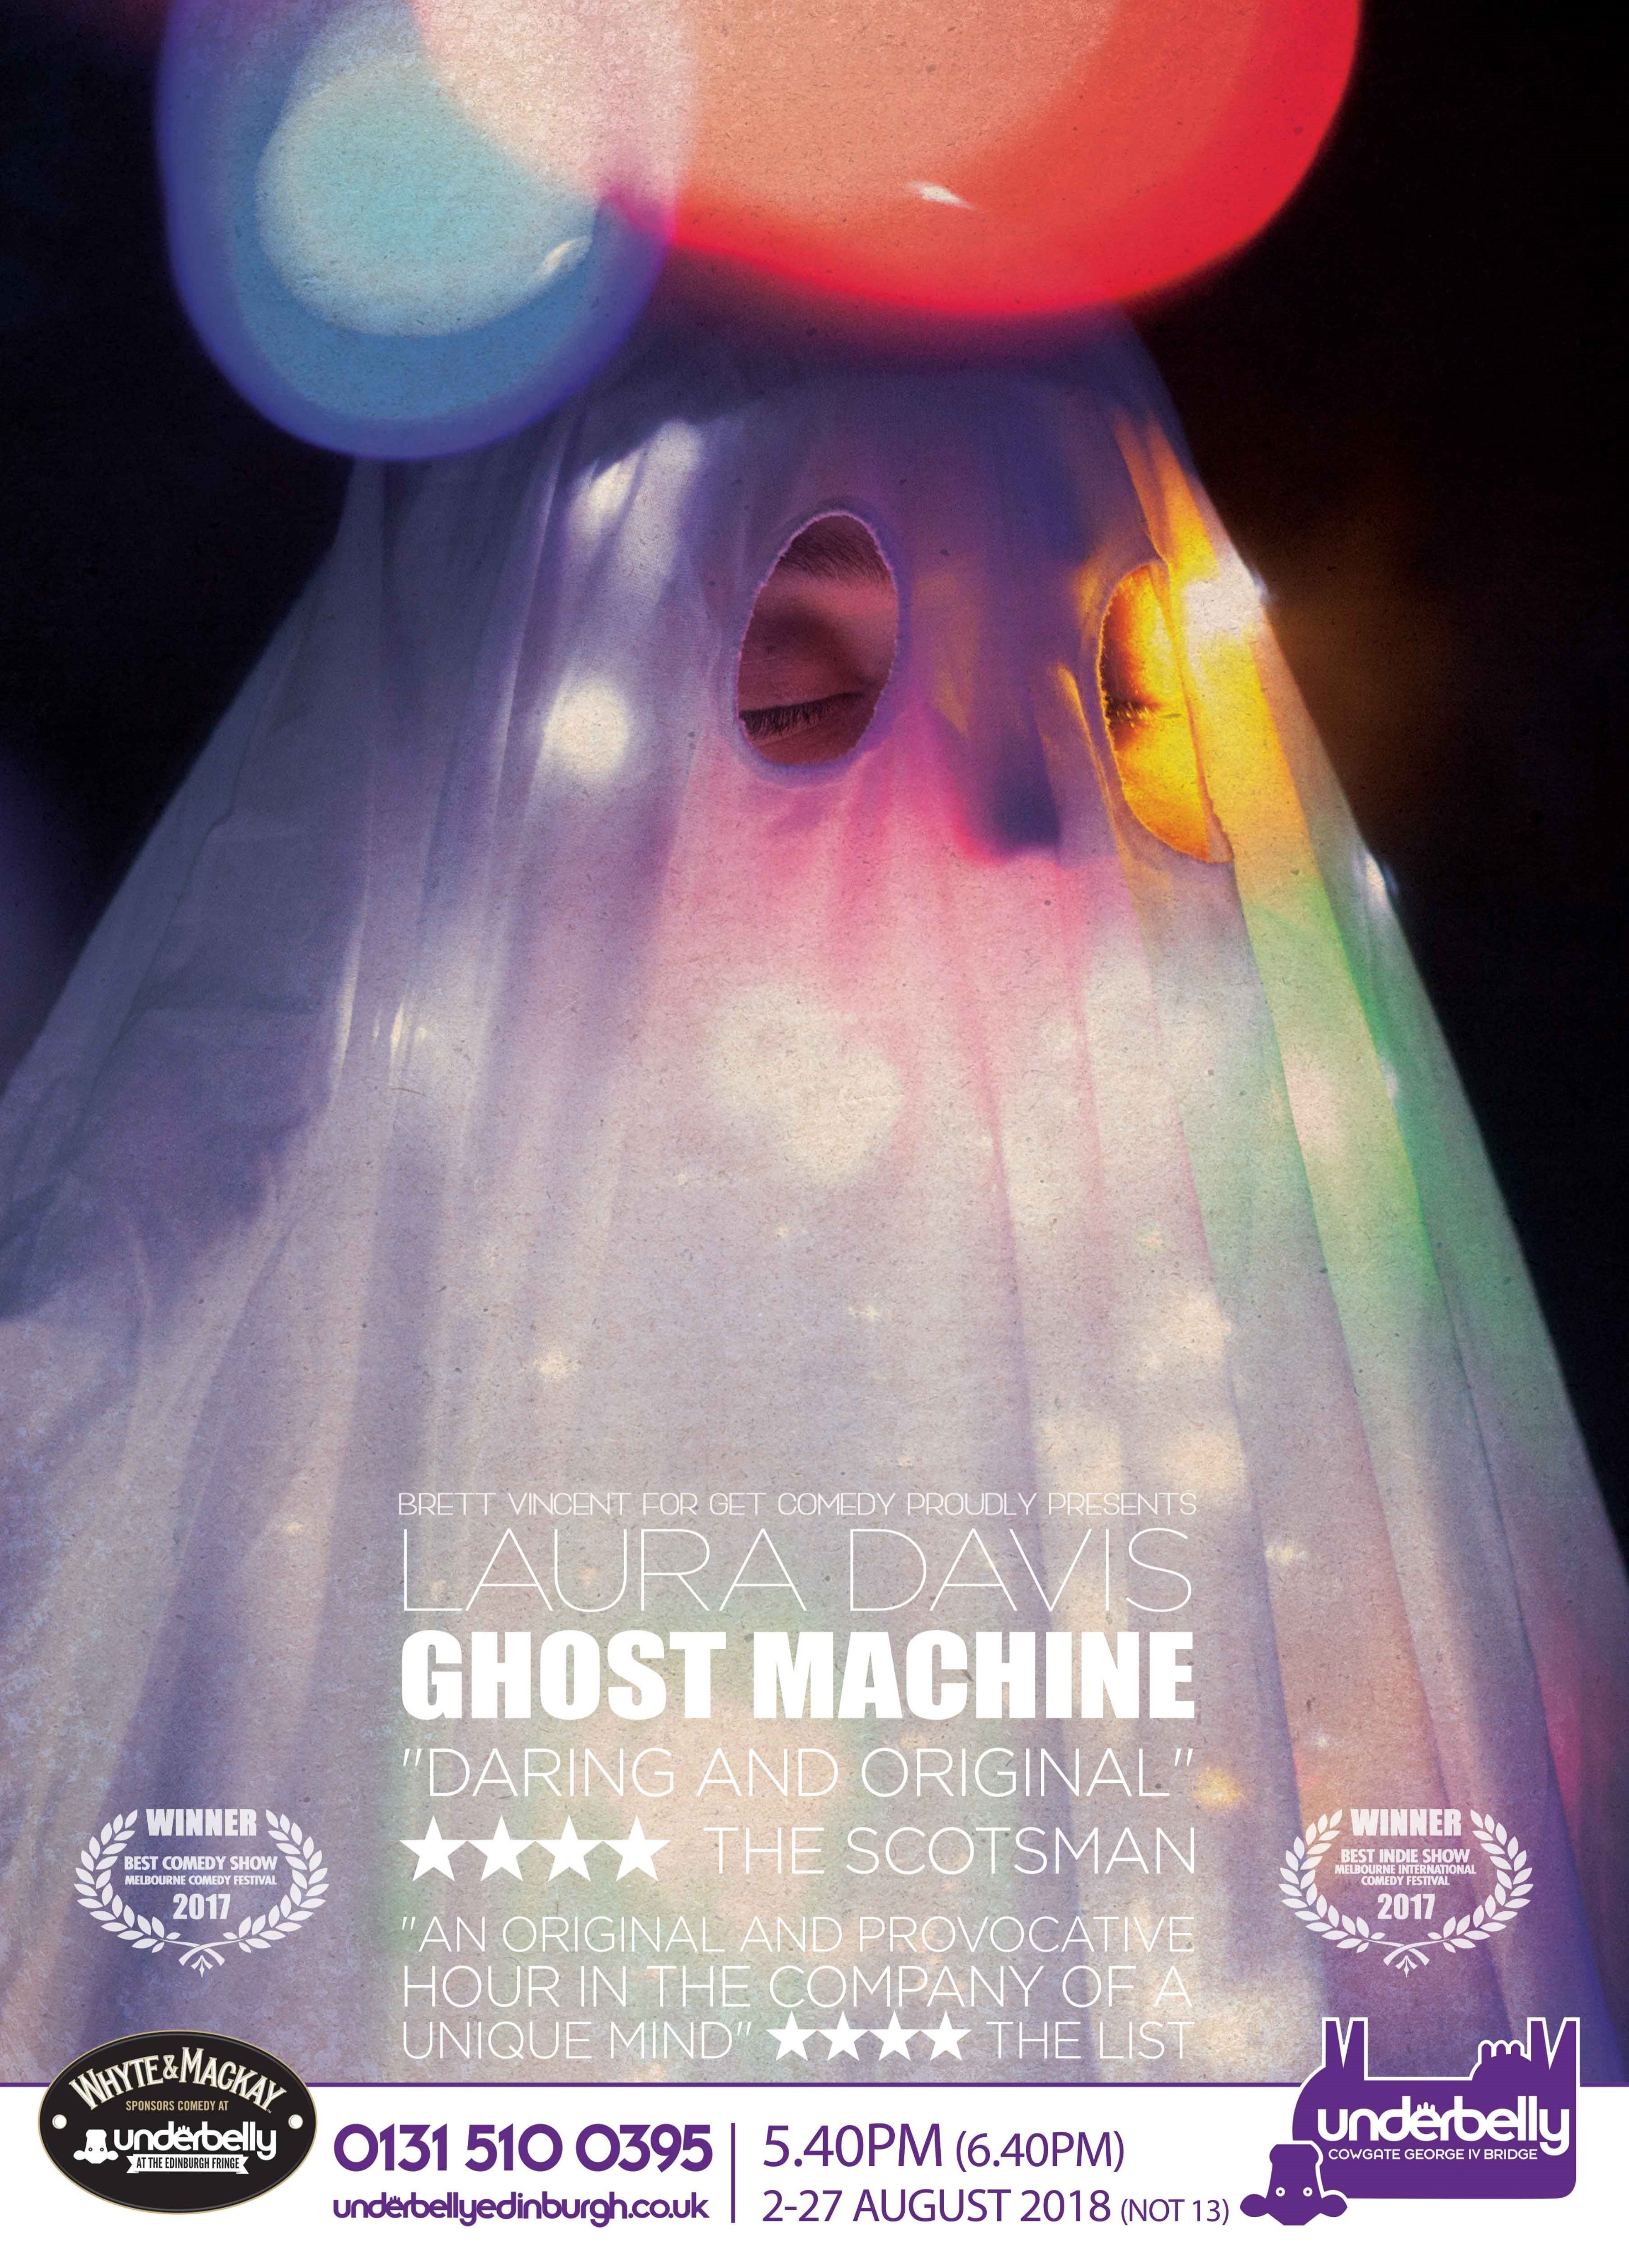 The poster for Laura Davis: Ghost Machine